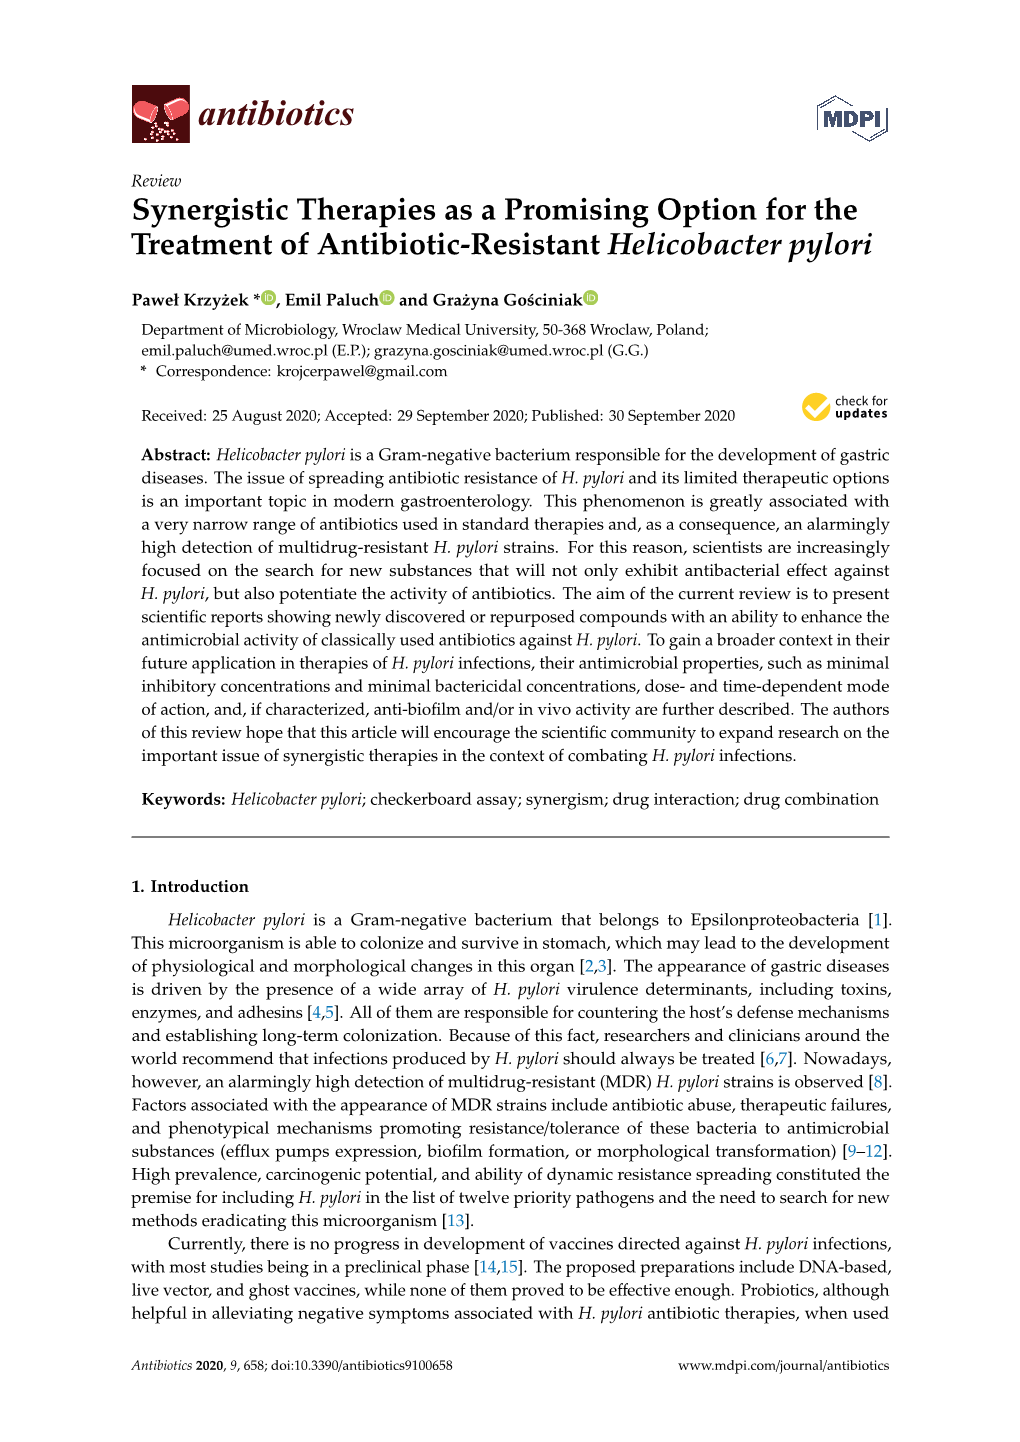 Synergistic Therapies As a Promising Option for the Treatment of Antibiotic-Resistant Helicobacter Pylori